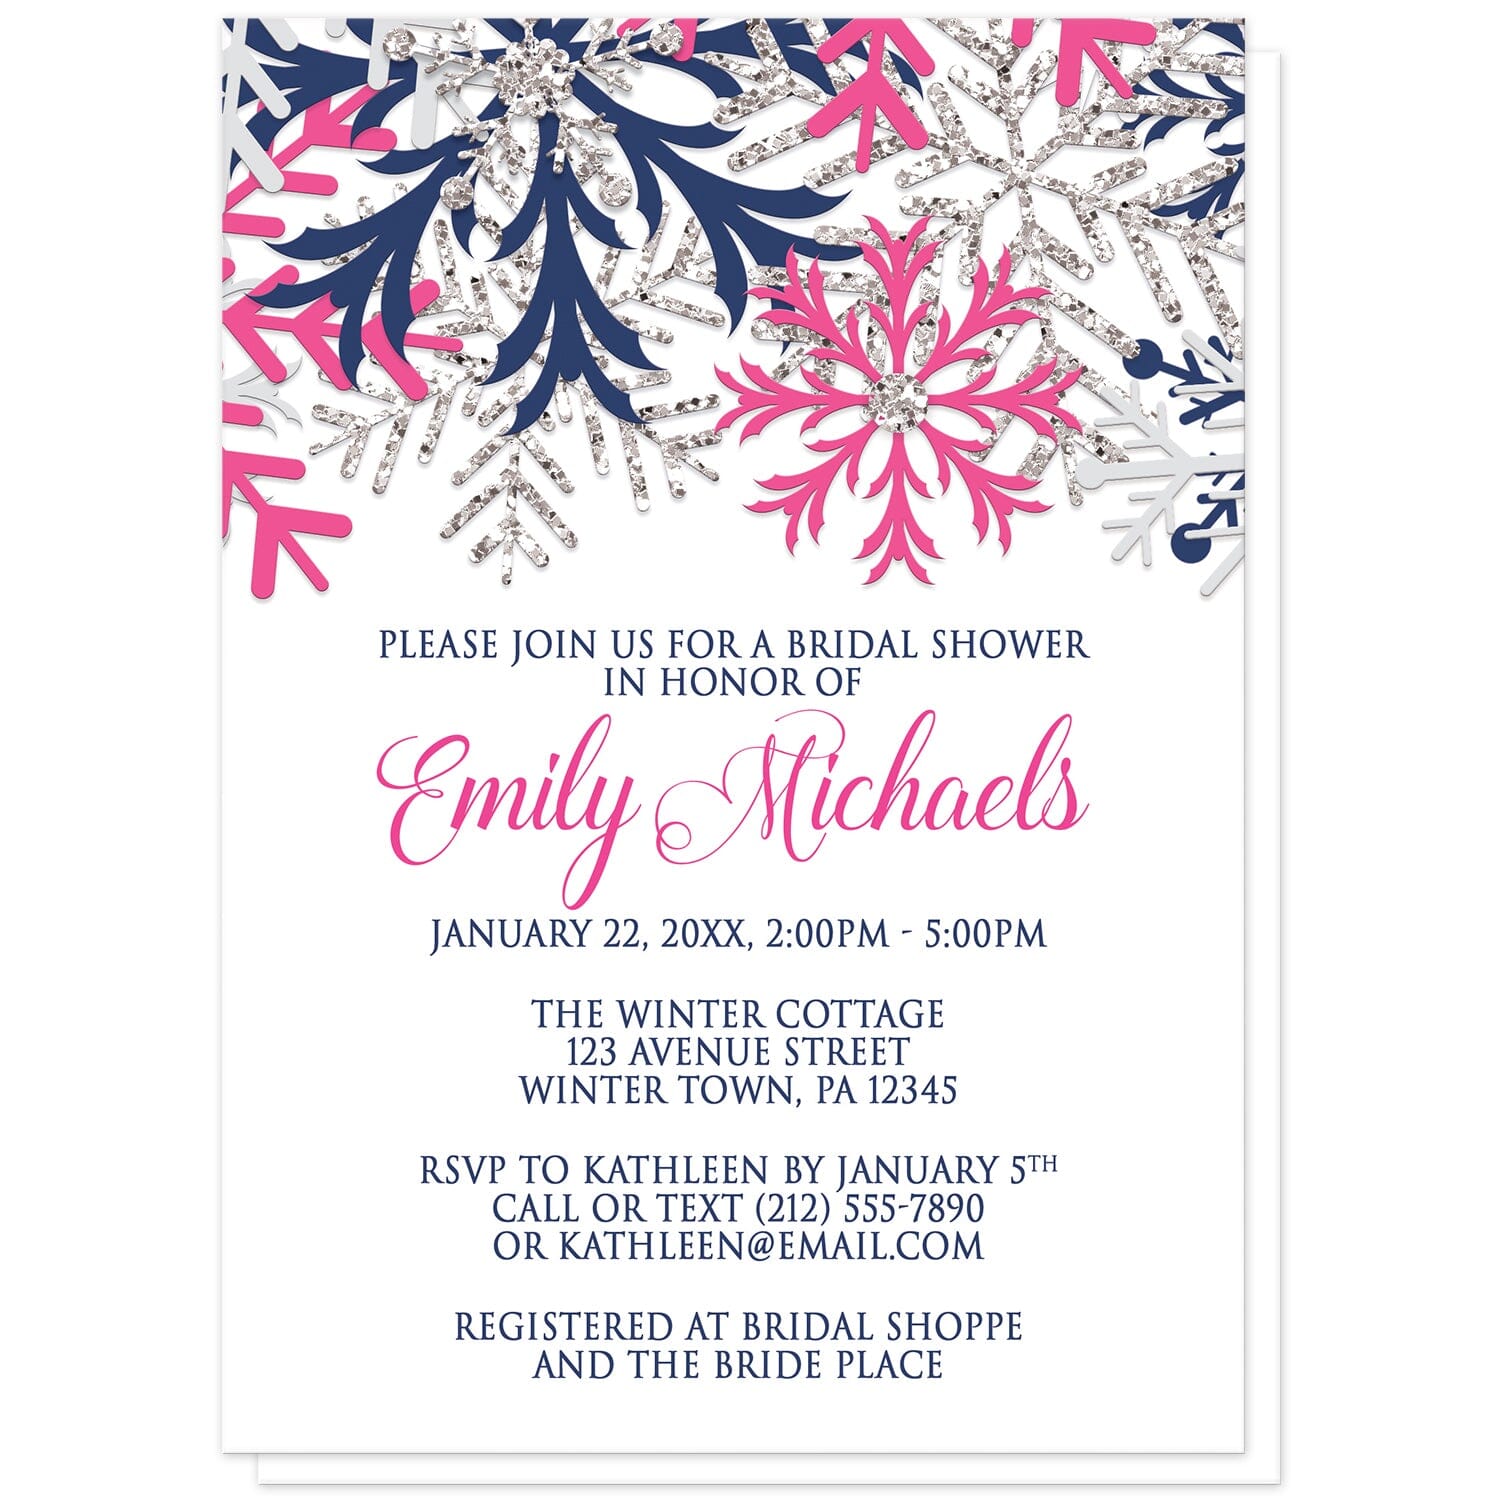 Winter Navy Fuchsia Snowflake Bridal Shower Invitations at Artistically Invited. Beautiful winter navy fuchsia snowflake bridal shower invitations designed with navy blue, fuchsia pink, silver-colored glitter-illustrated, and light gray snowflakes along the top over a white background. Your personalized bridal shower celebration details are custom printed in navy blue and fuchsia below the pretty snowflakes.